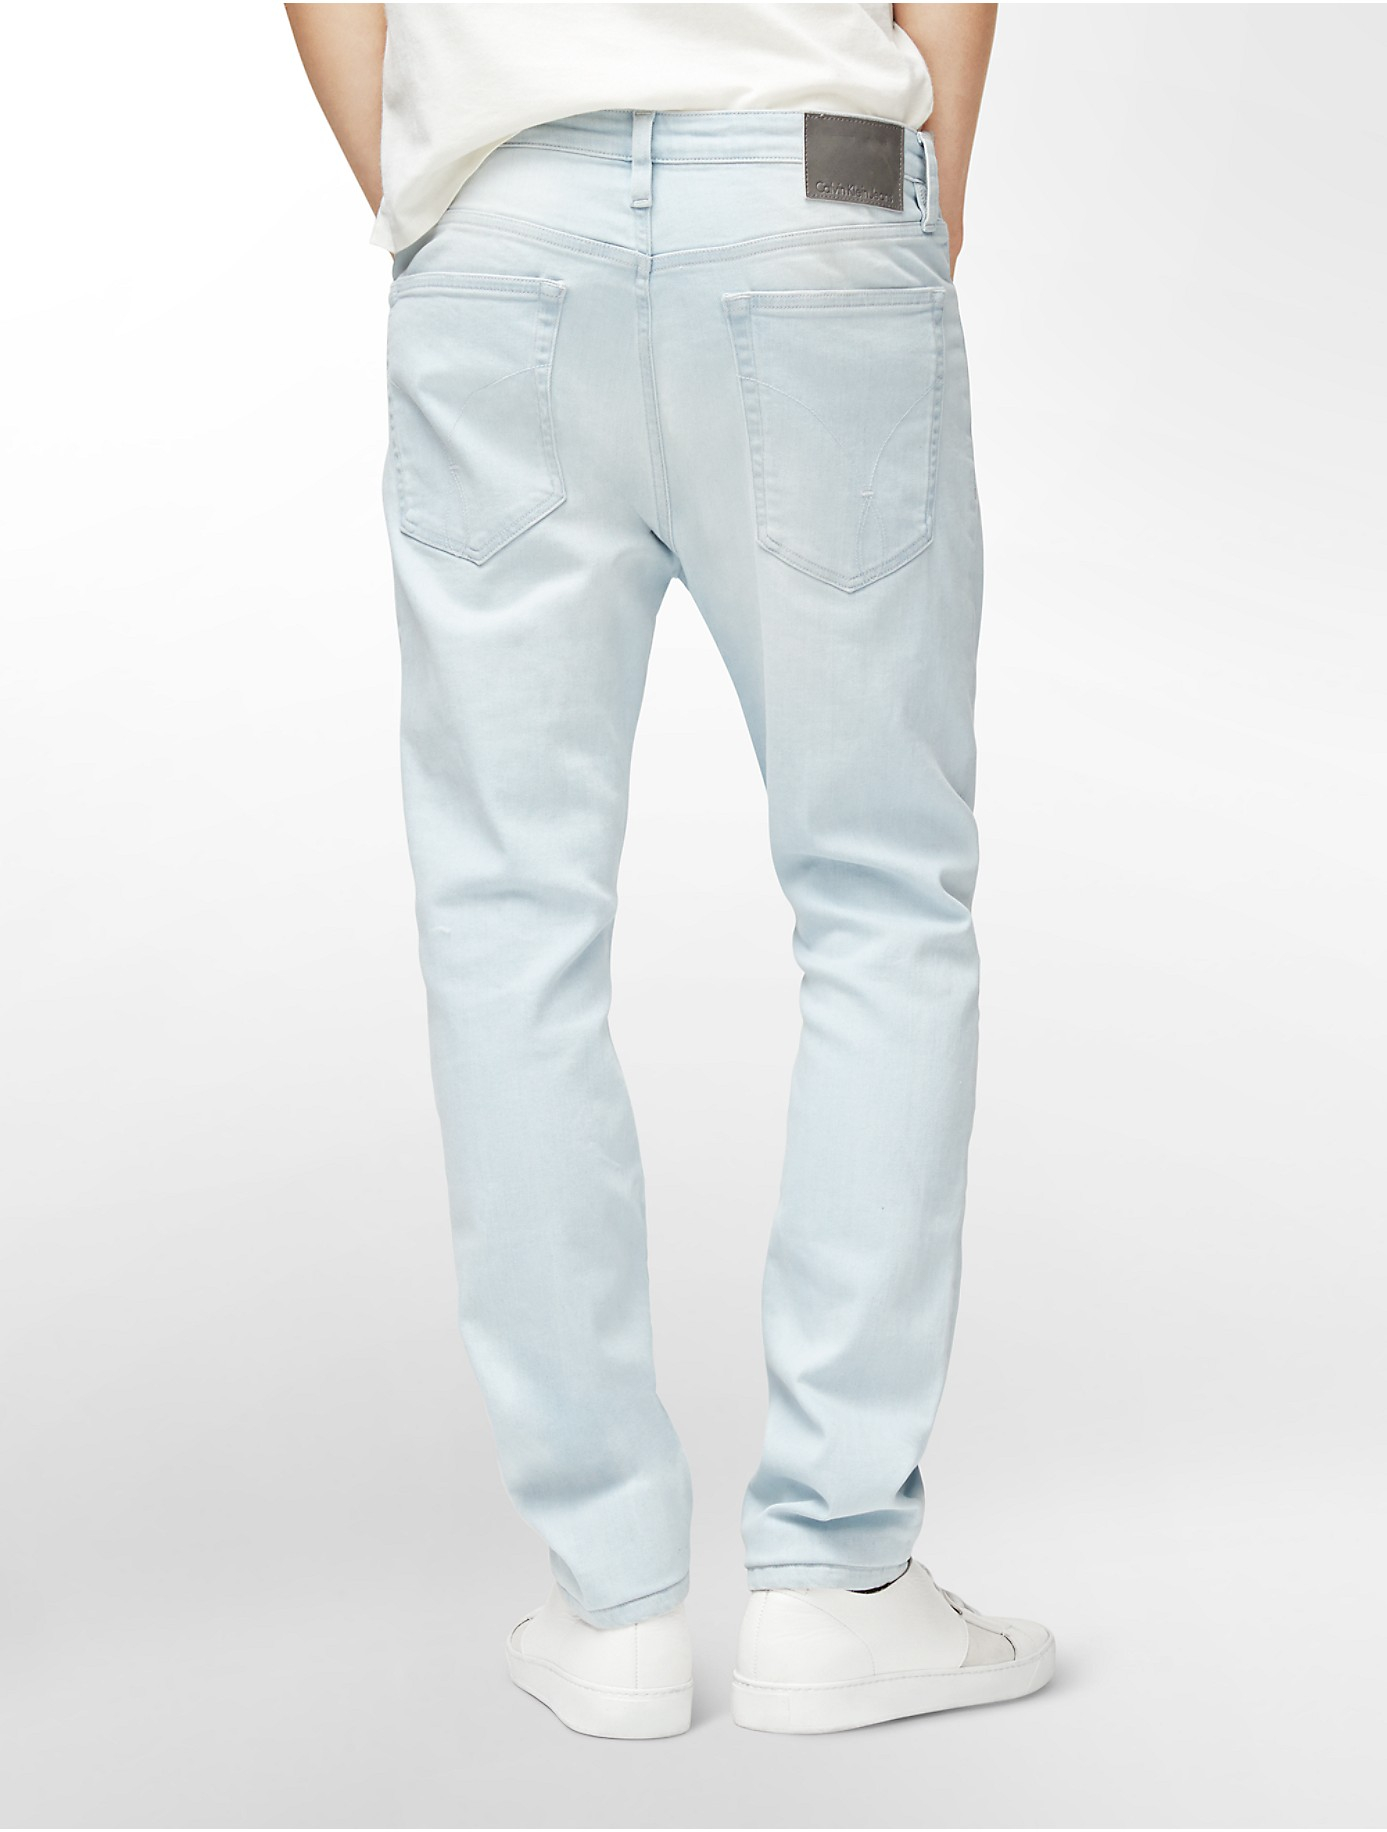 Lyst - Calvin klein Jeans Cameron Slim Tapered Leg Light Wash Jeans in ...